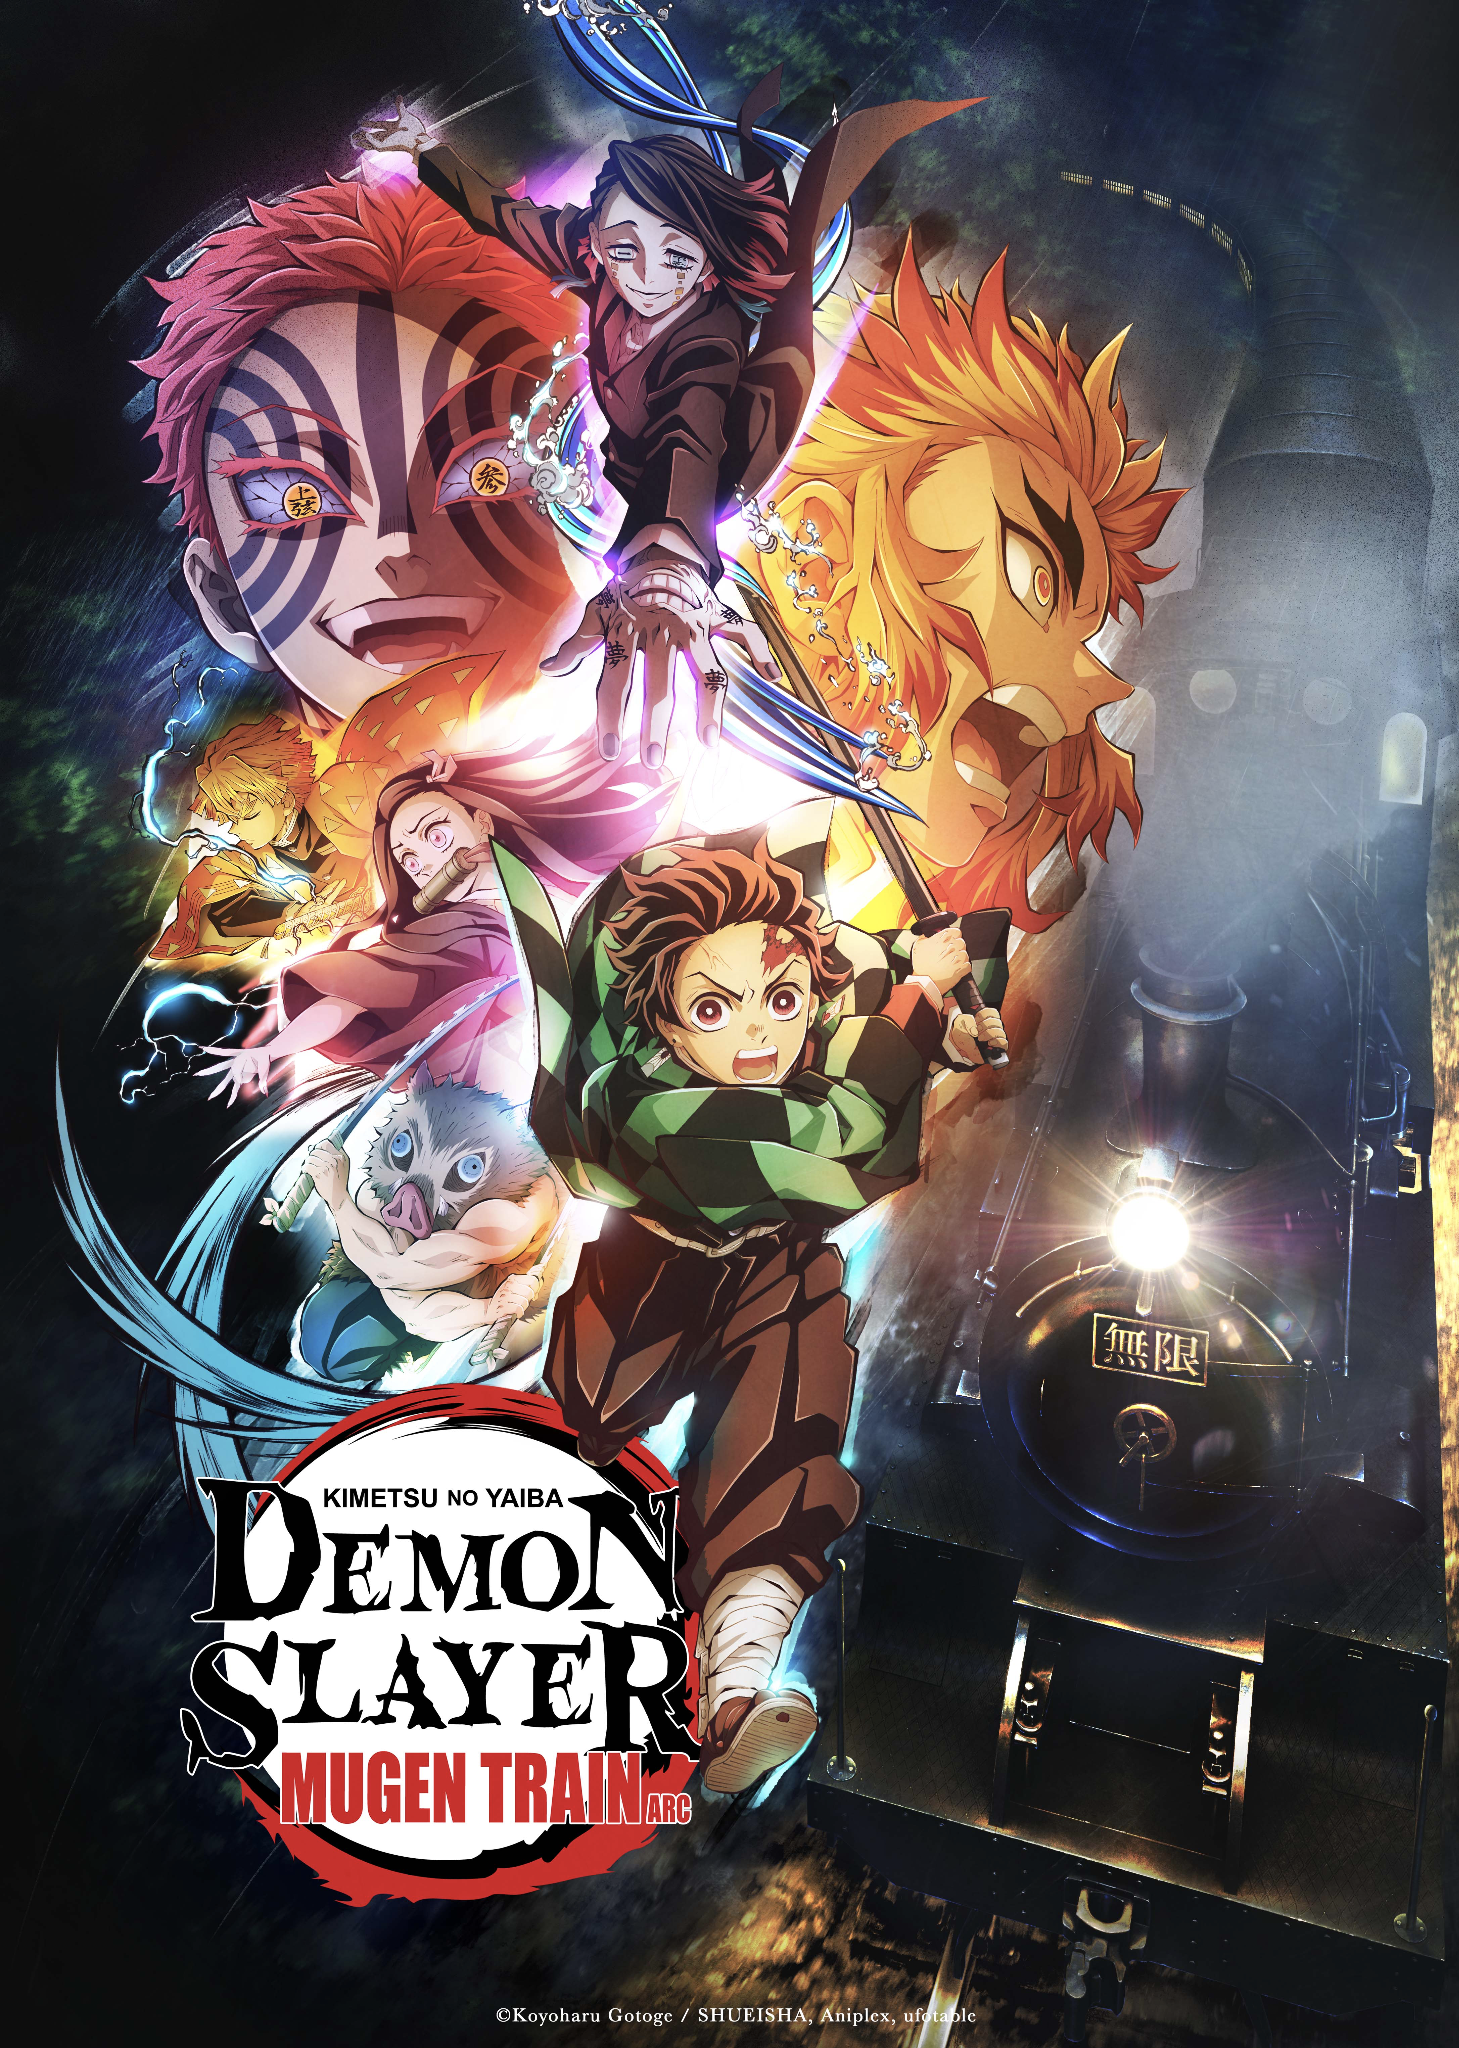 demon slayer mugen train most watched anime broadcast 21st century